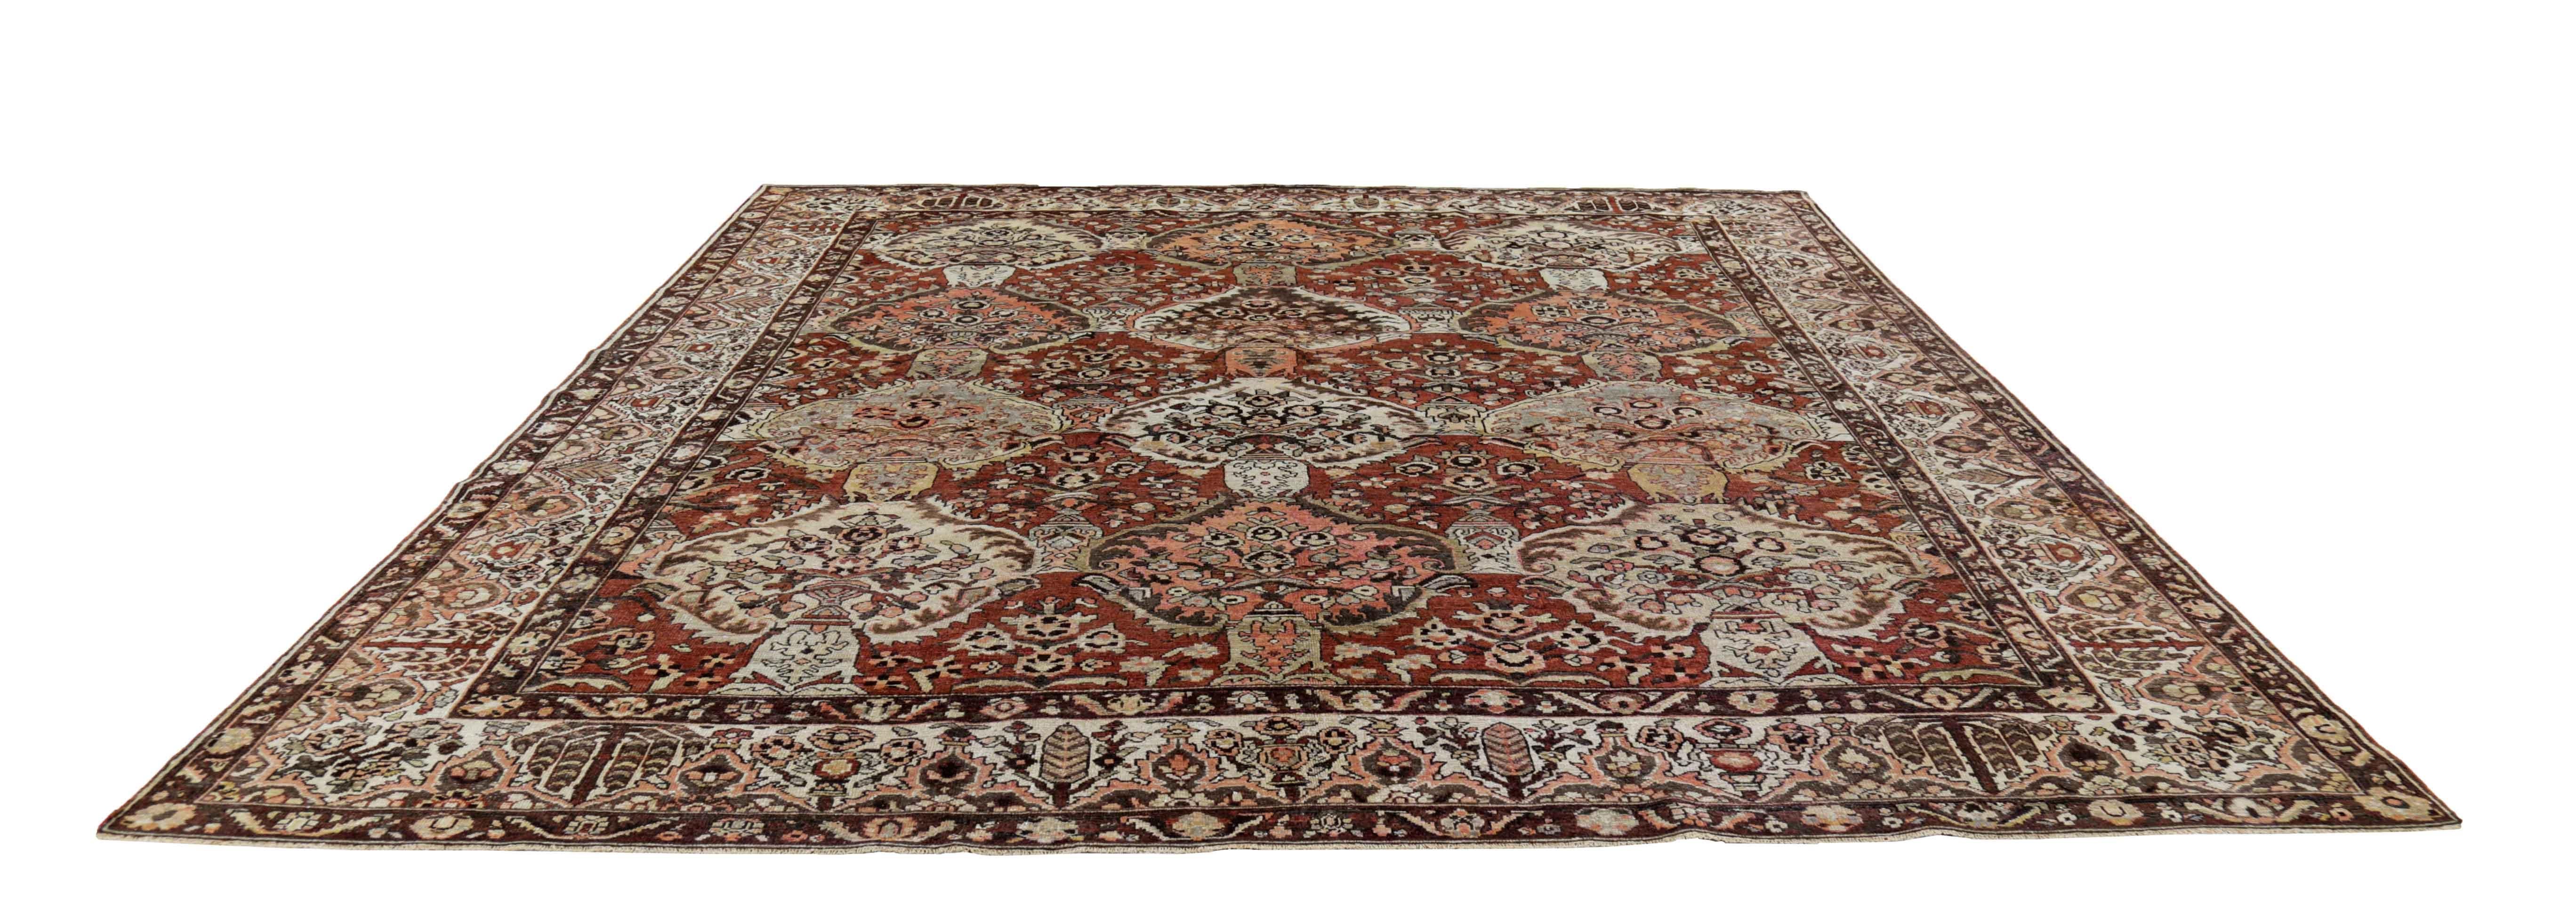 Antique Persian square rug handwoven from the finest sheep’s wool. It’s colored with all-natural vegetable dyes that are safe for humans and pets. It’s a traditional Bakhtiar design handwoven by expert artisans. It’s a lovely square rug that can be